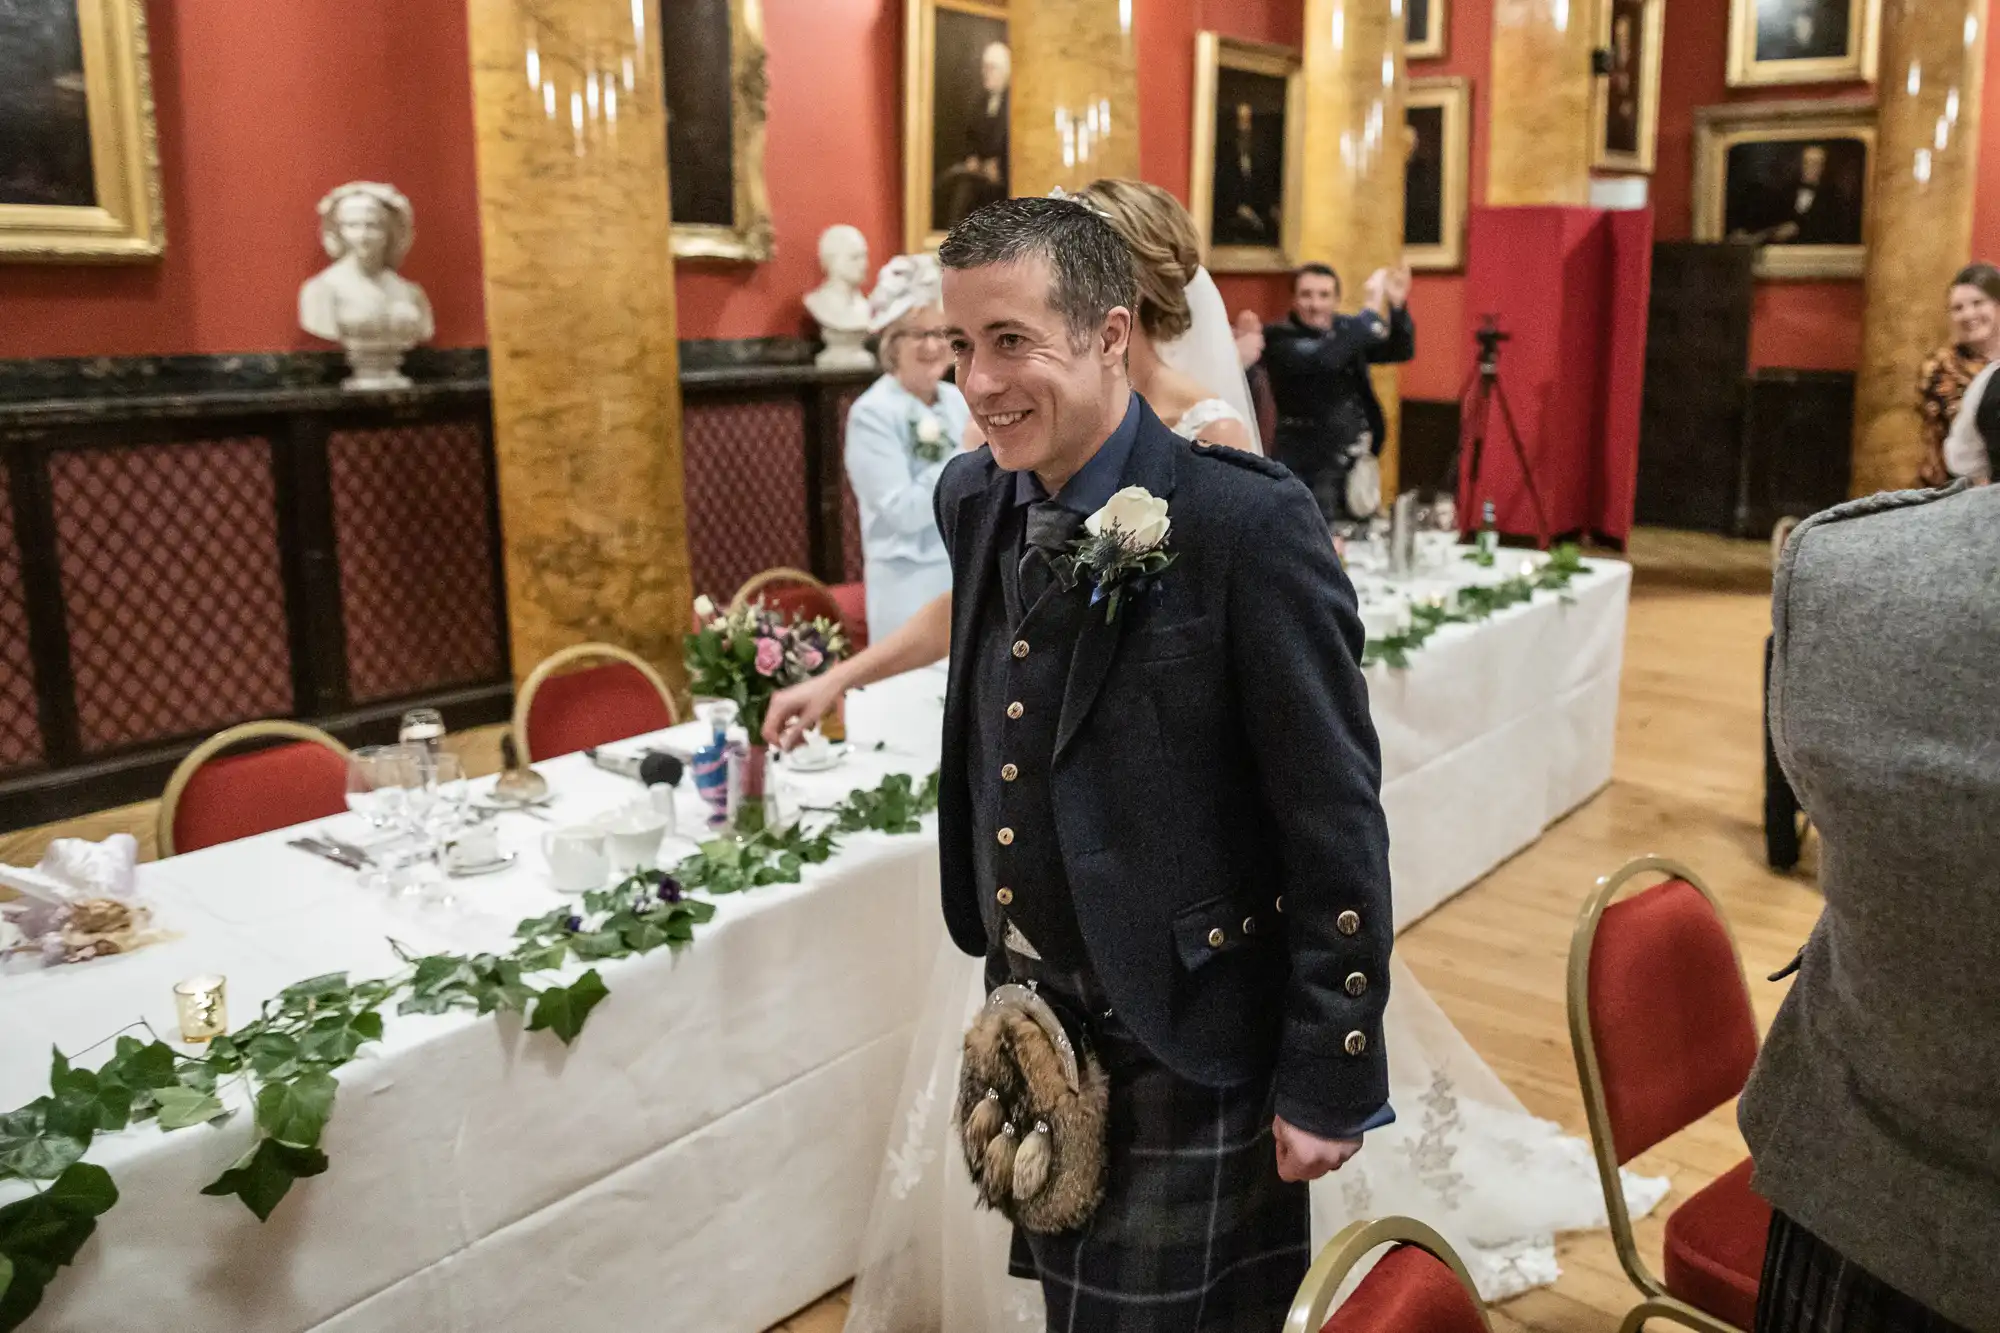 A man in traditional Scottish attire with a sporran walks among tables adorned with greenery and white linens in a formal setting, surrounded by guests.